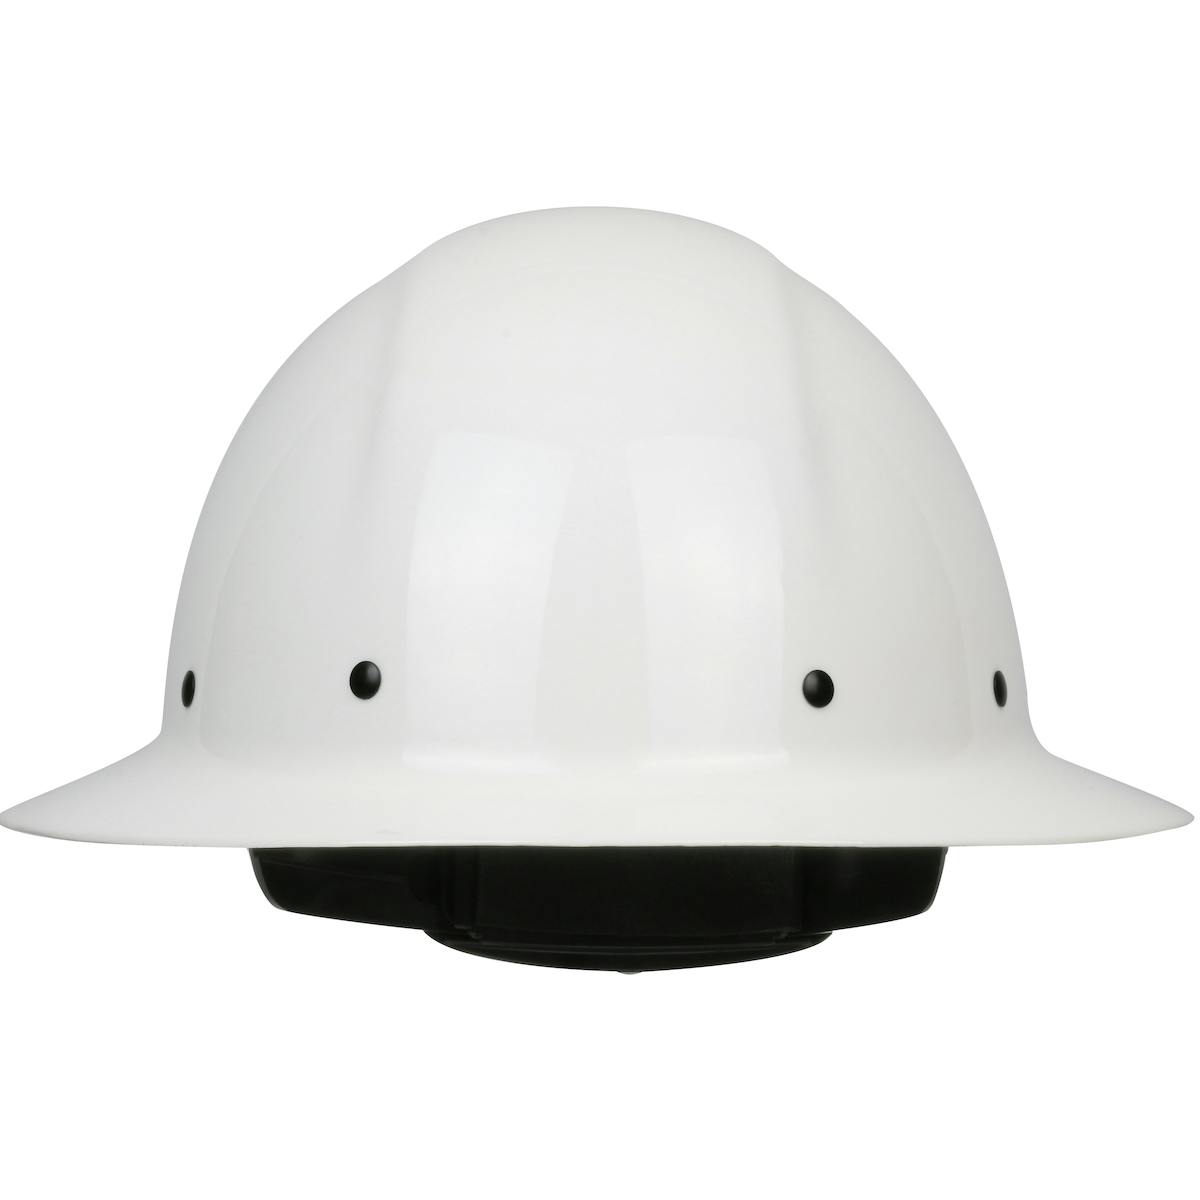 Wolfjaw™ Full Brim Smooth Dome Hard Hat with Fiberglass Resin Shell, 8-Point Riveted Textile Suspension and Wheel-Ratchet Adjustment (280-HP1481R)_1